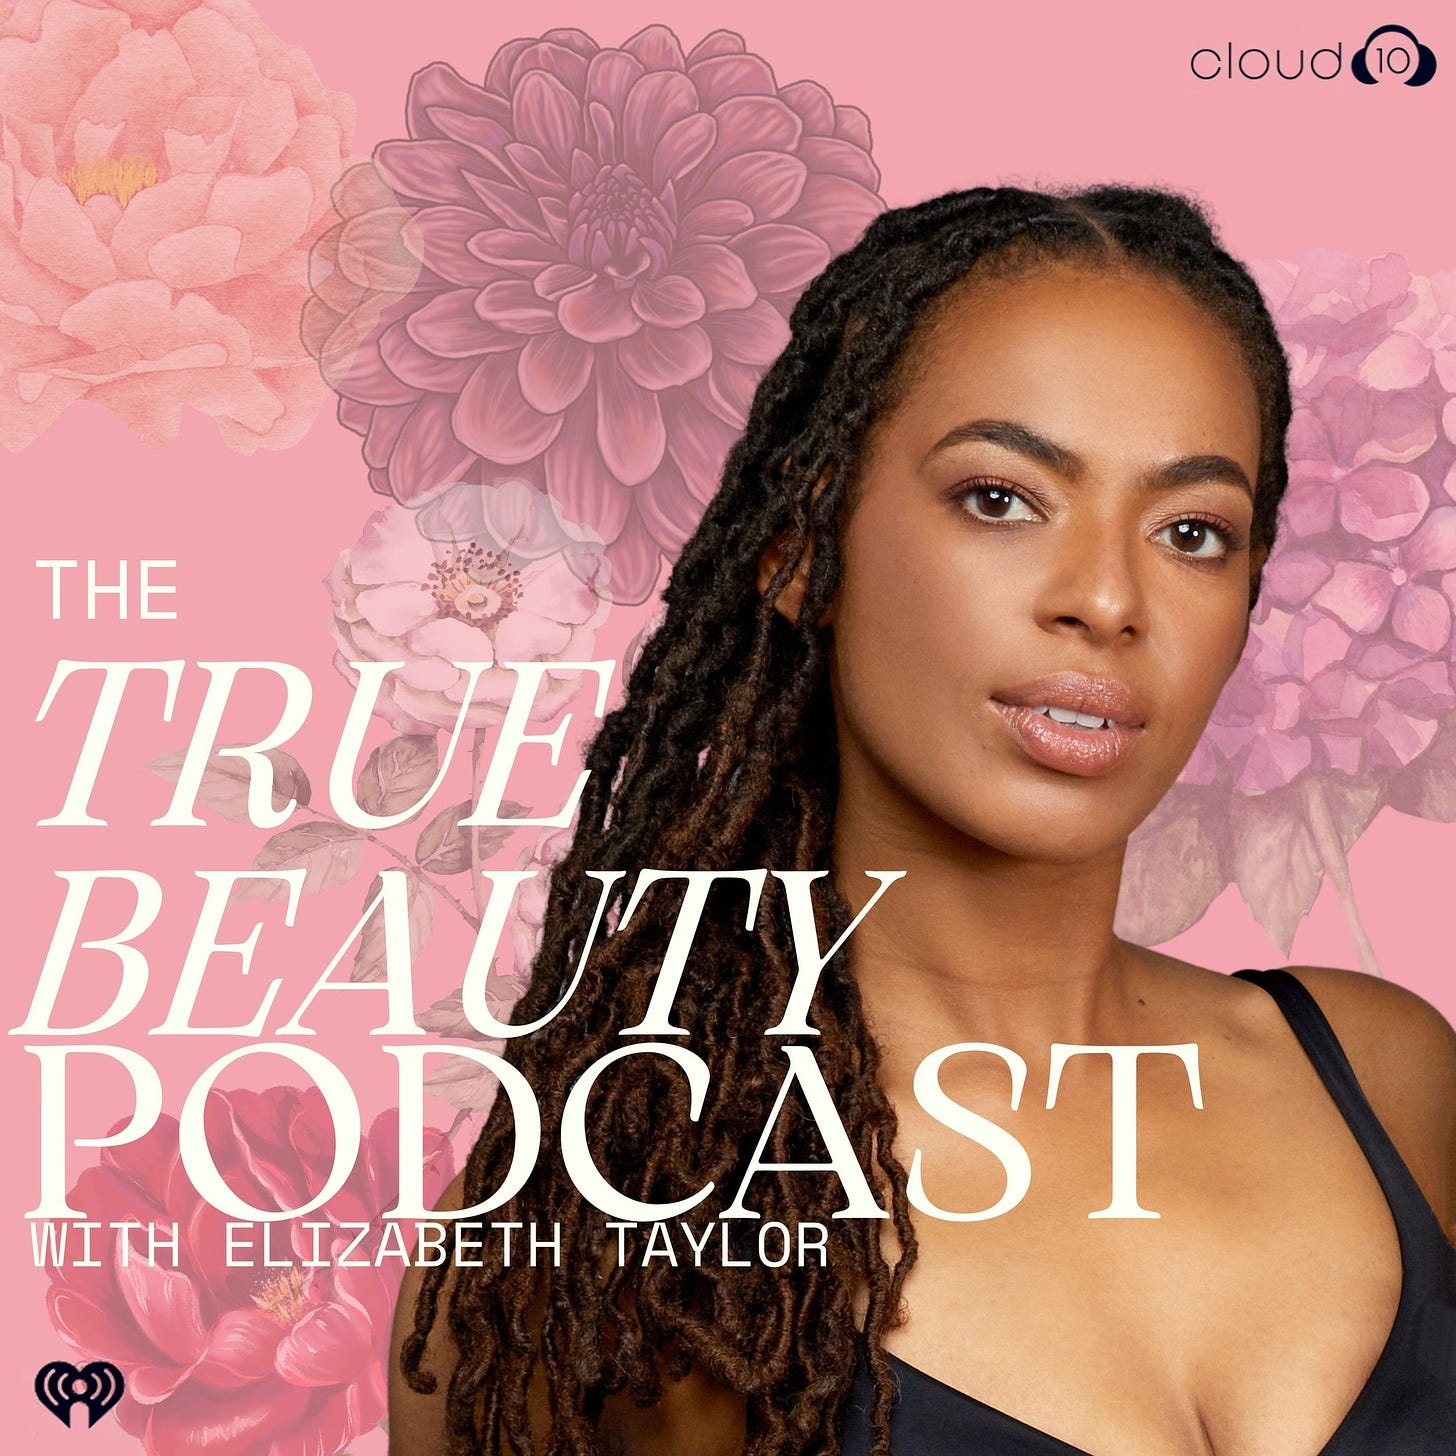 May be an image of 1 person and text that says "cloud THE TRUE BEAUTY PODCAST WITH ELIZABETH TAYLOR"